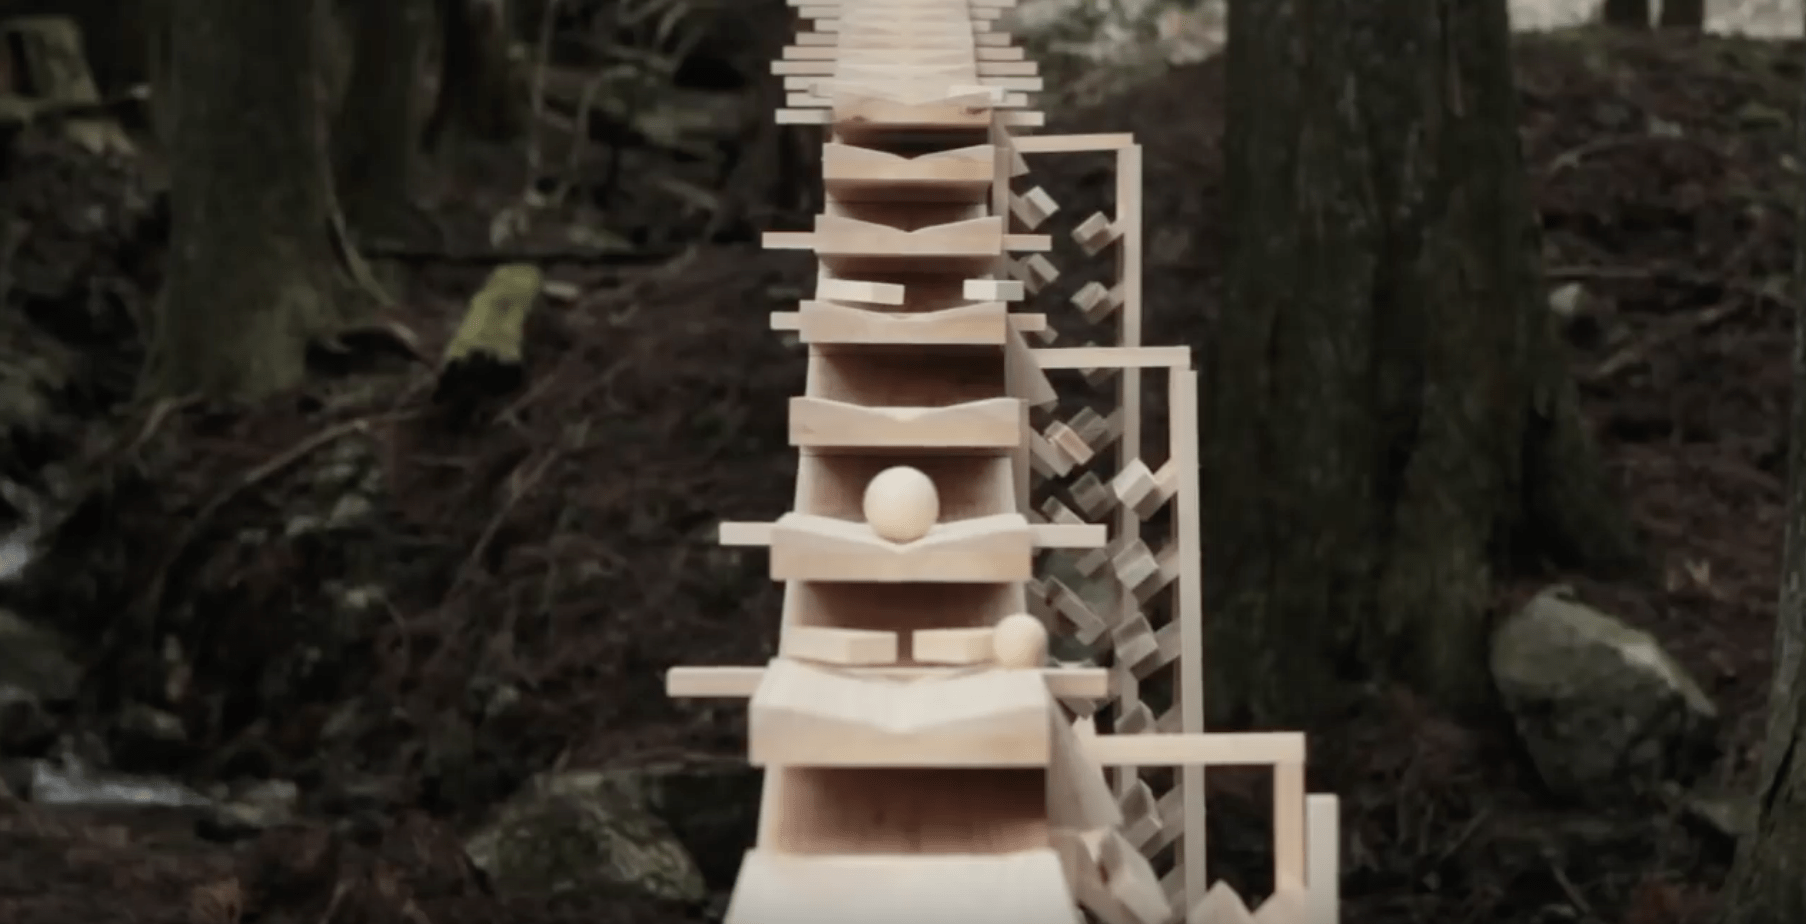 Made in Japan: Witness the World’s Most Mesmerizing Gravity-Powered Sound Machine